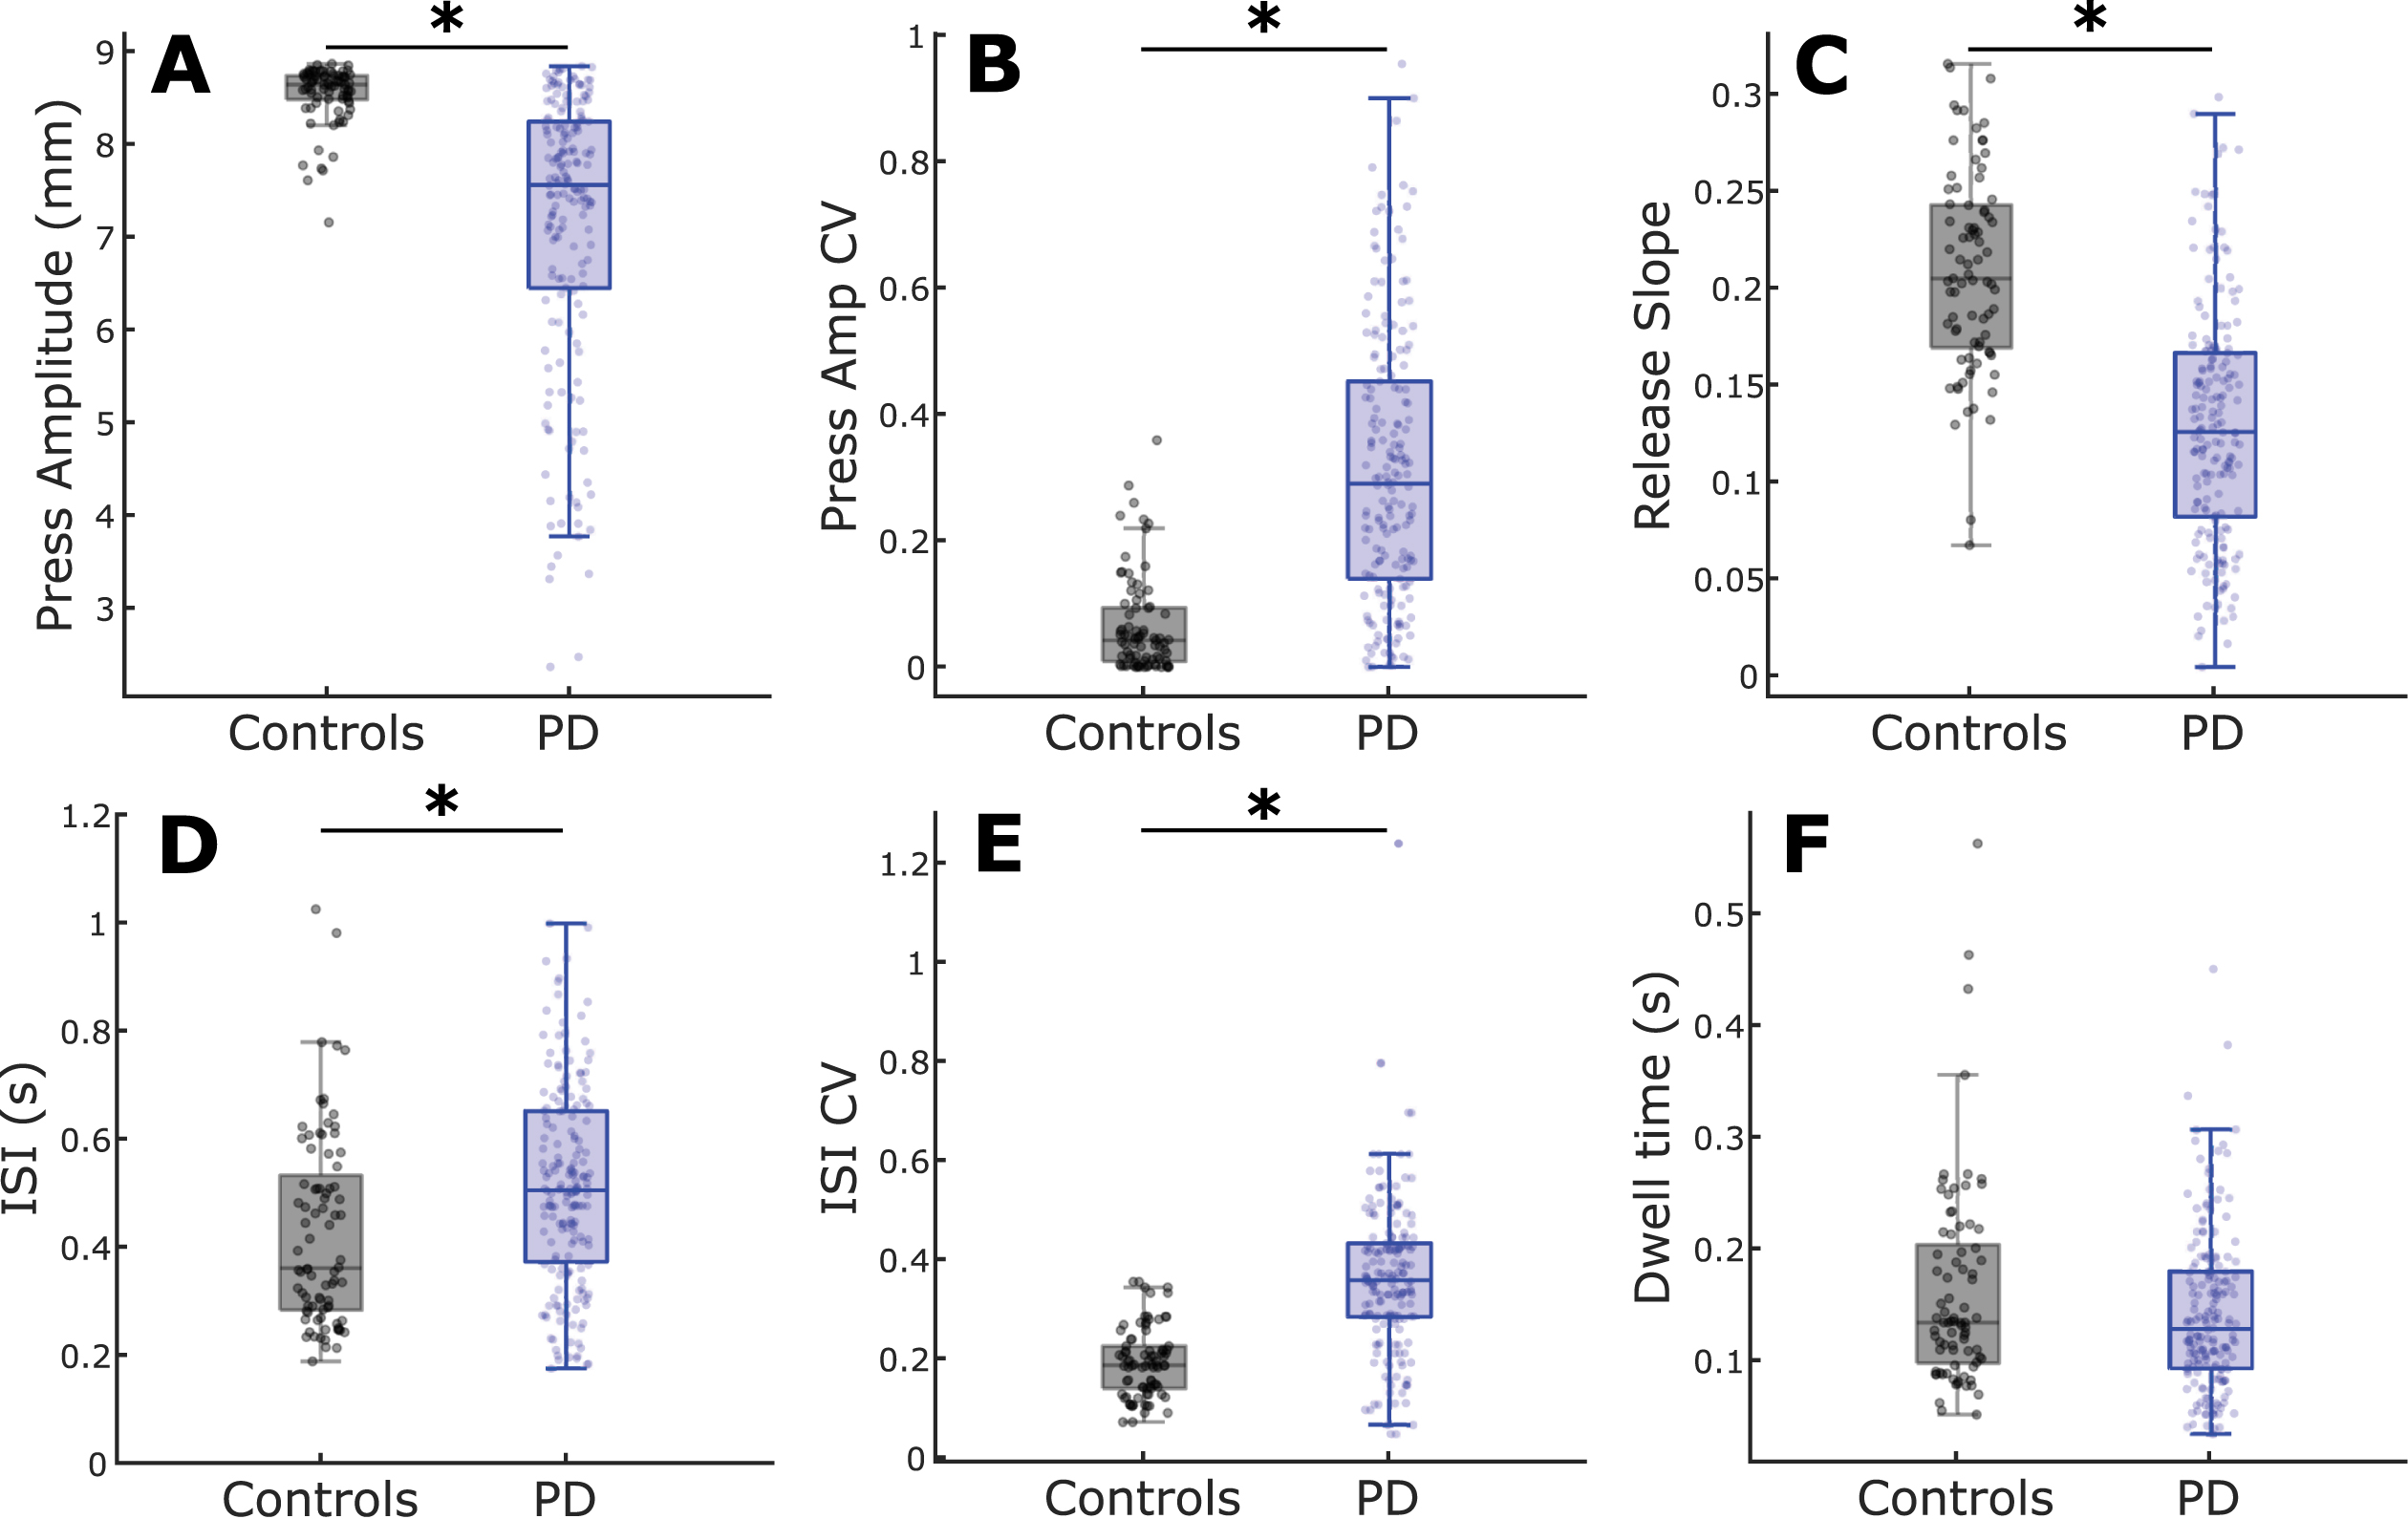 Comparison of QDG metrics between PD and controls. Boxplots with individual data overlaid for (A) Press amplitude, (B) Press amplitude CV, (C) Release slope, (D) ISI, (E) ISI CV, and (F) Dwell time. *indicates significant differences between groups. See online edition for color version.